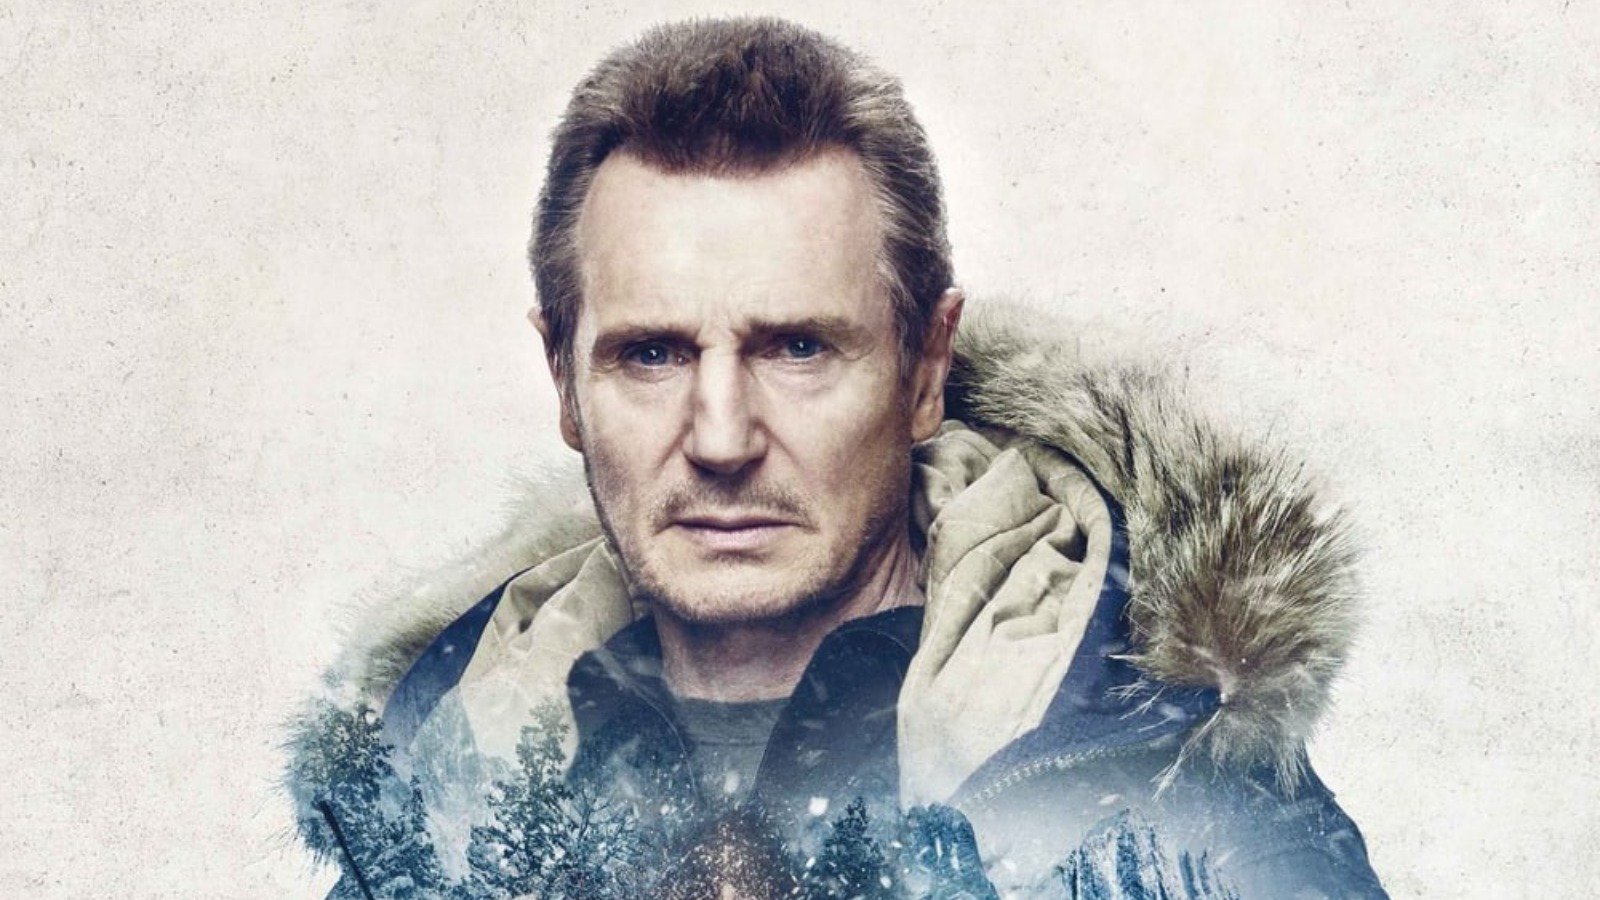 Ranking The 10 "Old Man Liam Neeson Action Films" From Worst To Best